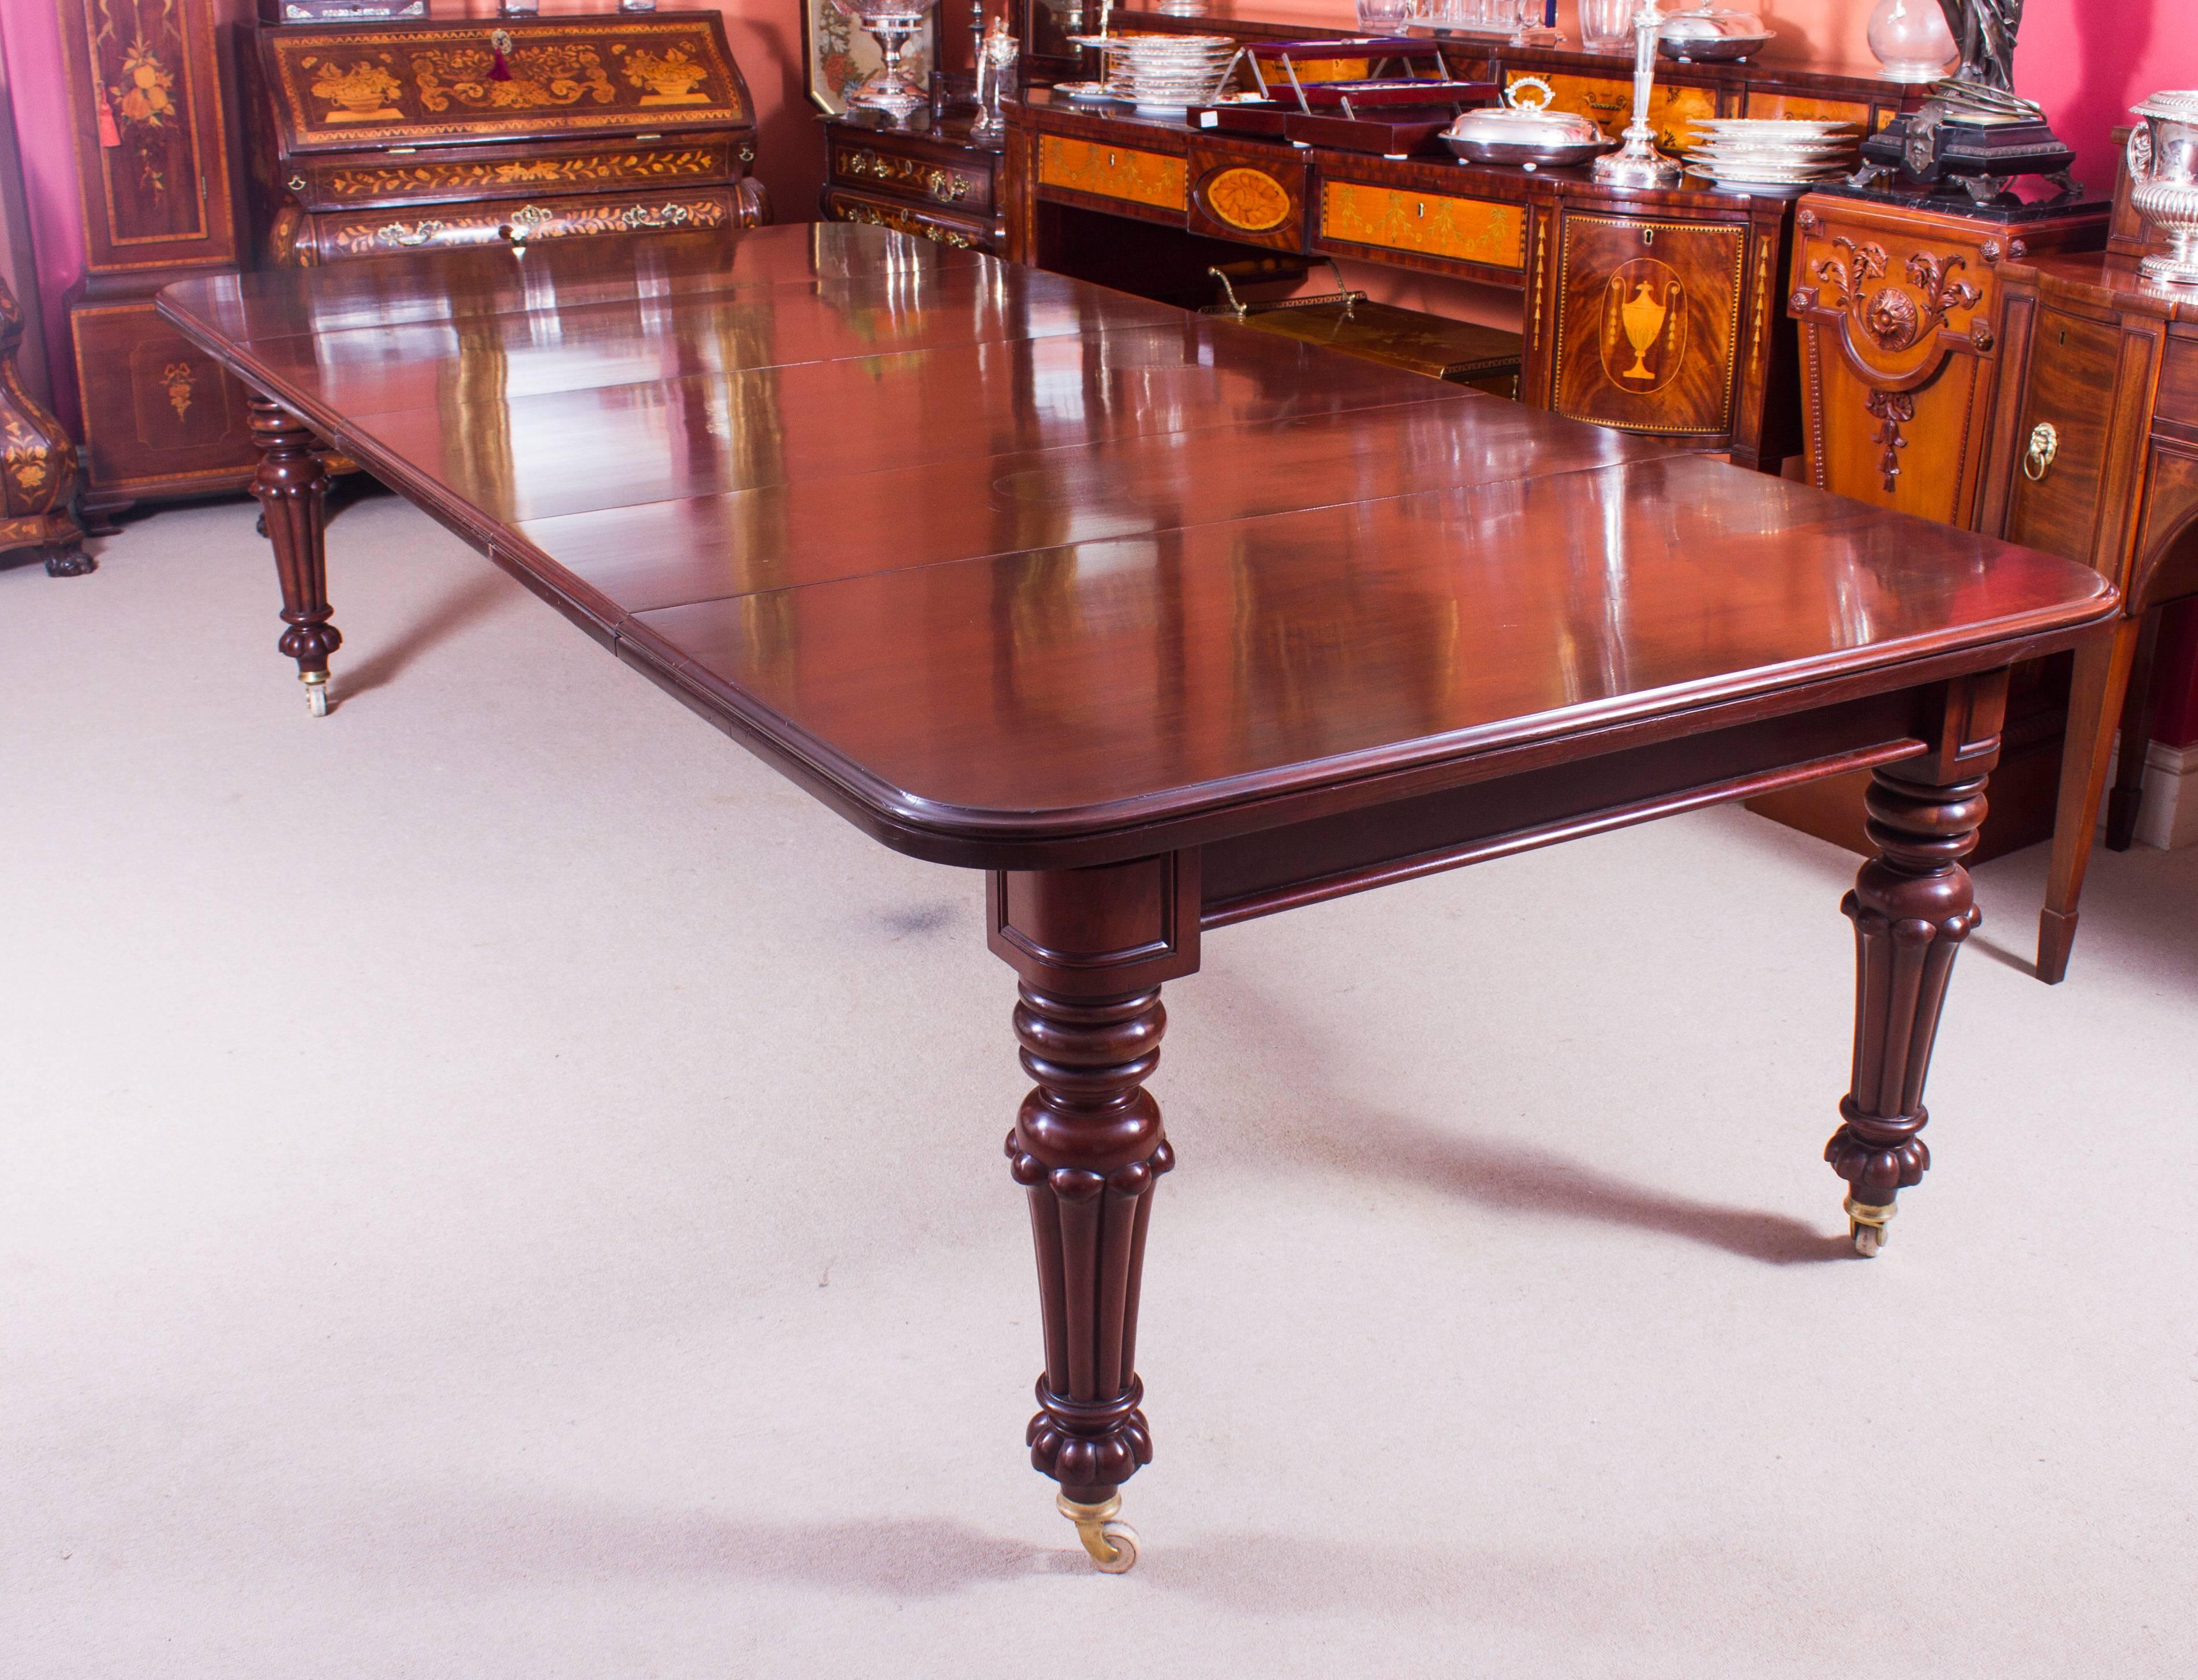 This is a beautiful dining set comprising a beautiful antique Victorian flame mahogany extending dining table, circa 1840 in date and a beautiful set of 12 Vintage swag back dining chairs.

This amazing table can sit twelve people in comfort and